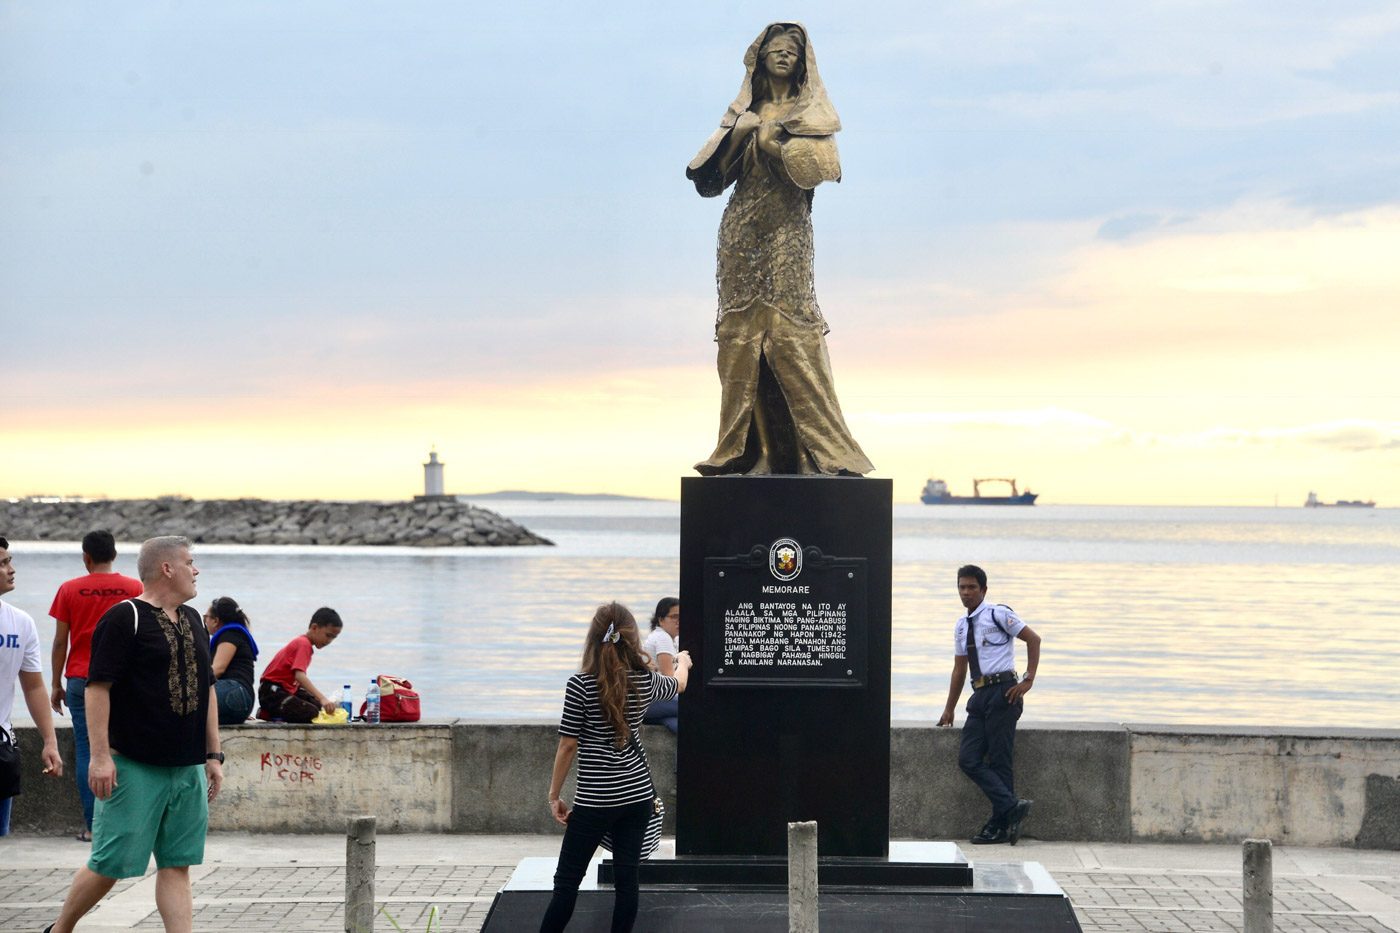 What’s wrong with this statue of a comfort woman in Manila?